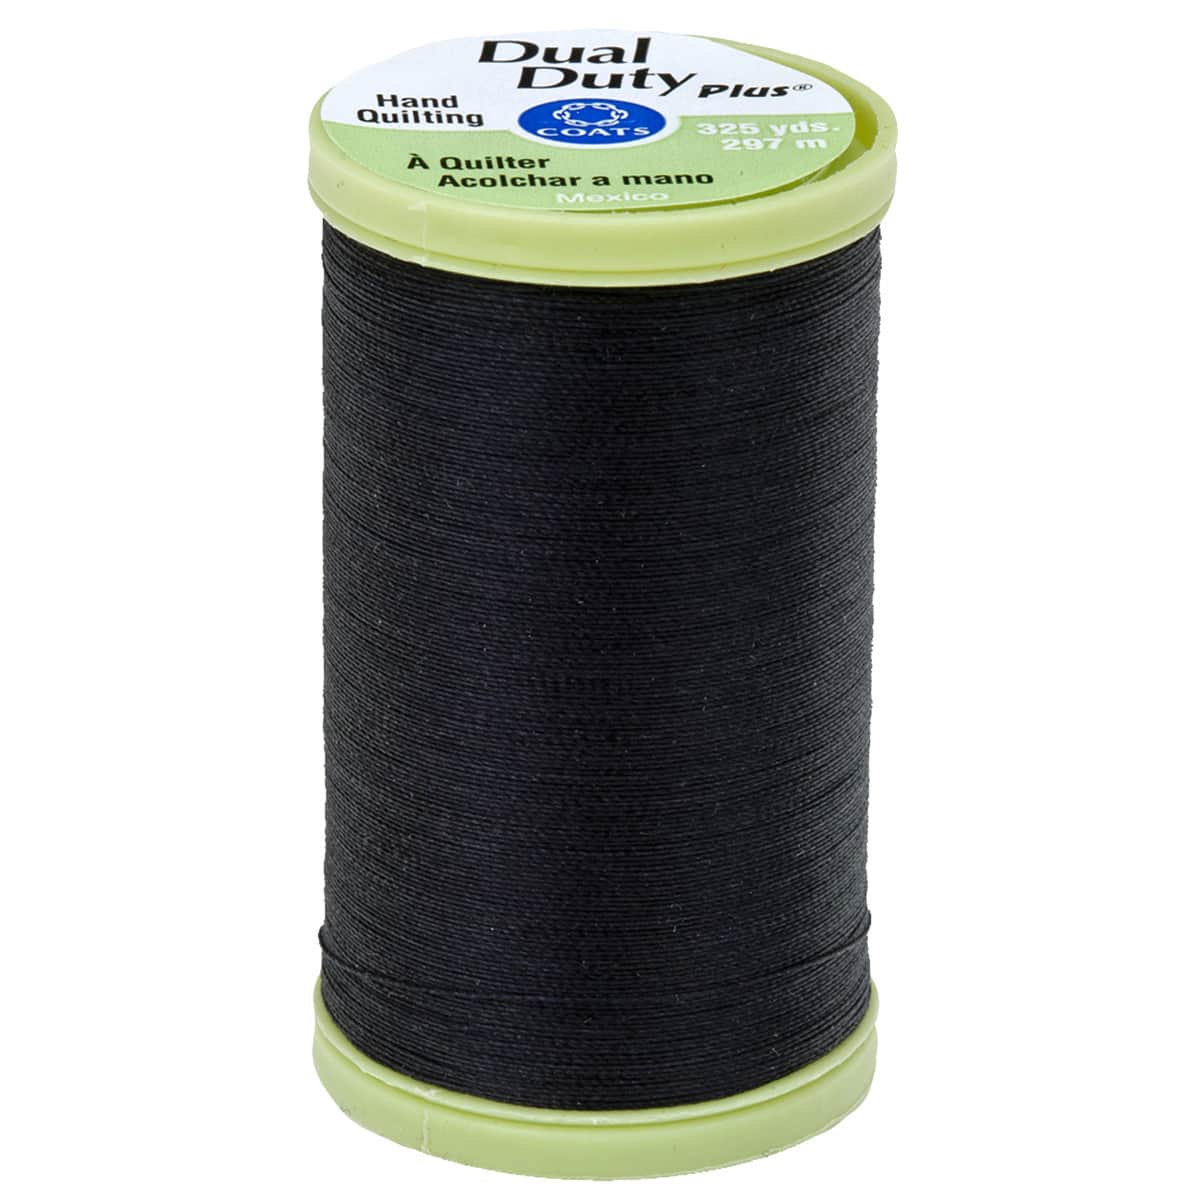 Coats Bold Hand Quilting Thread 175yd-Natural, 1 count - Kroger